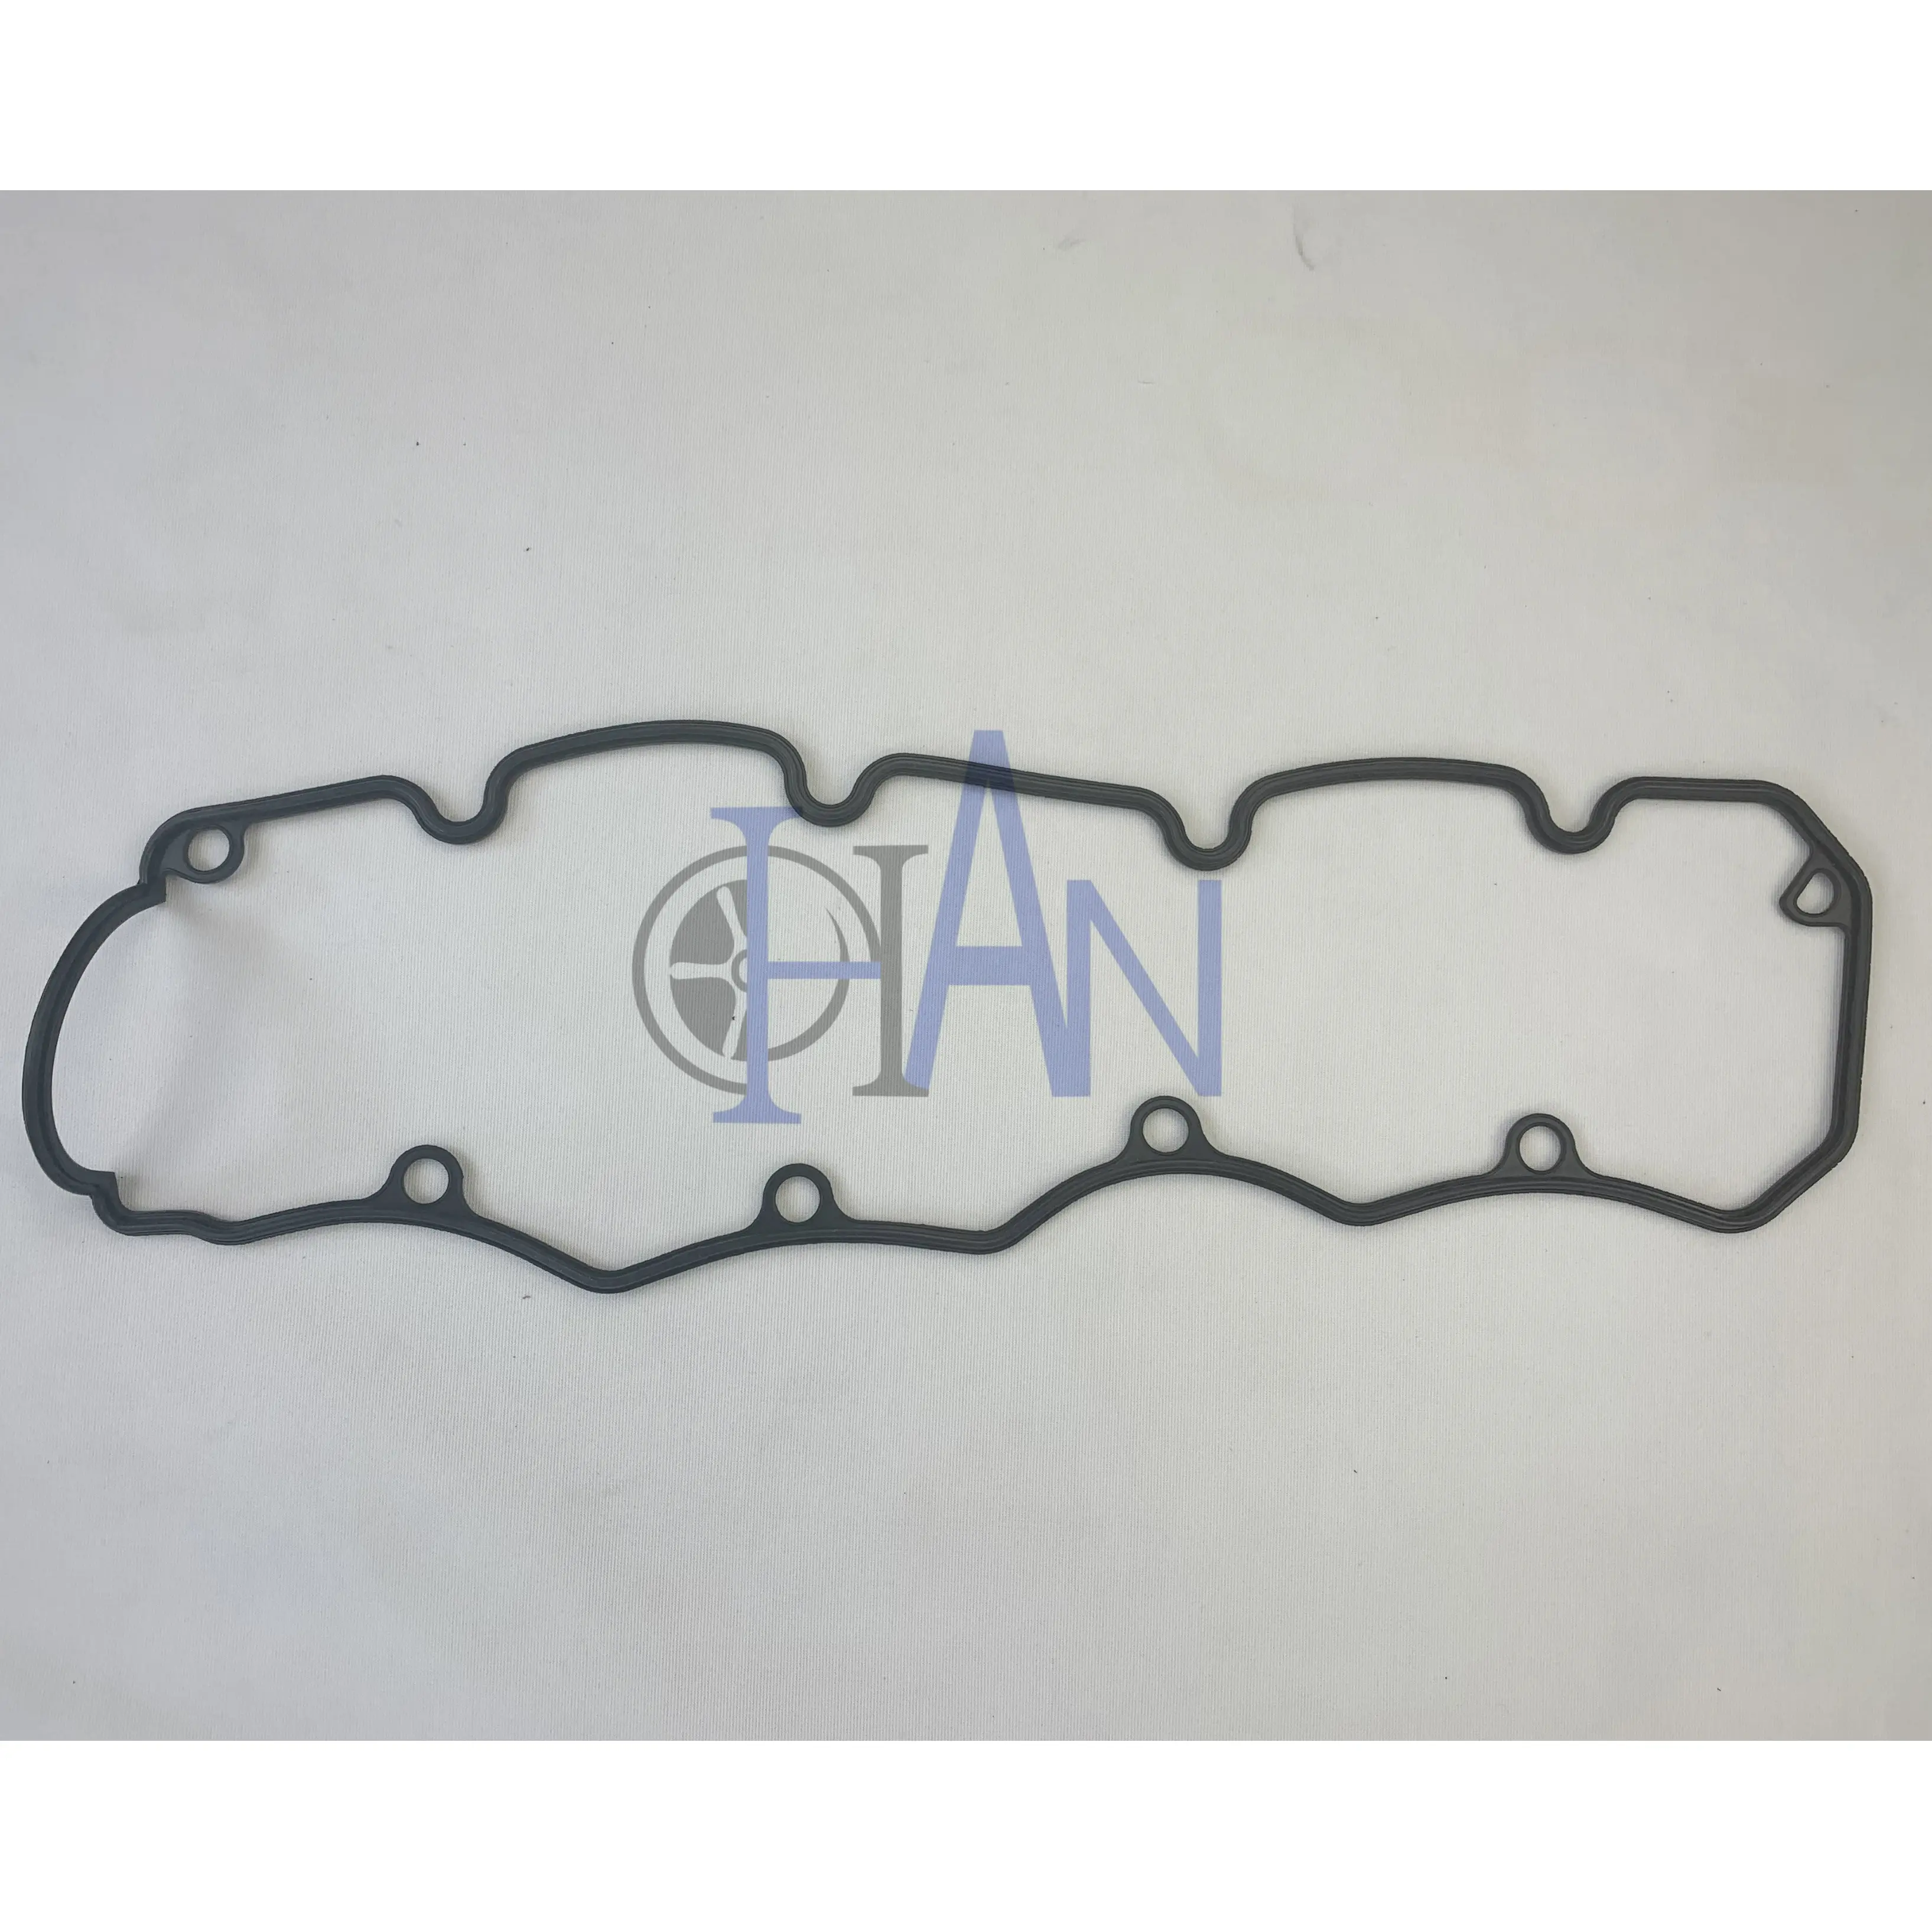 500388382 Cylinder Head Cover Gasket fit für Iveco Daily Fiat Ducato 2.8 euro2 motor teile